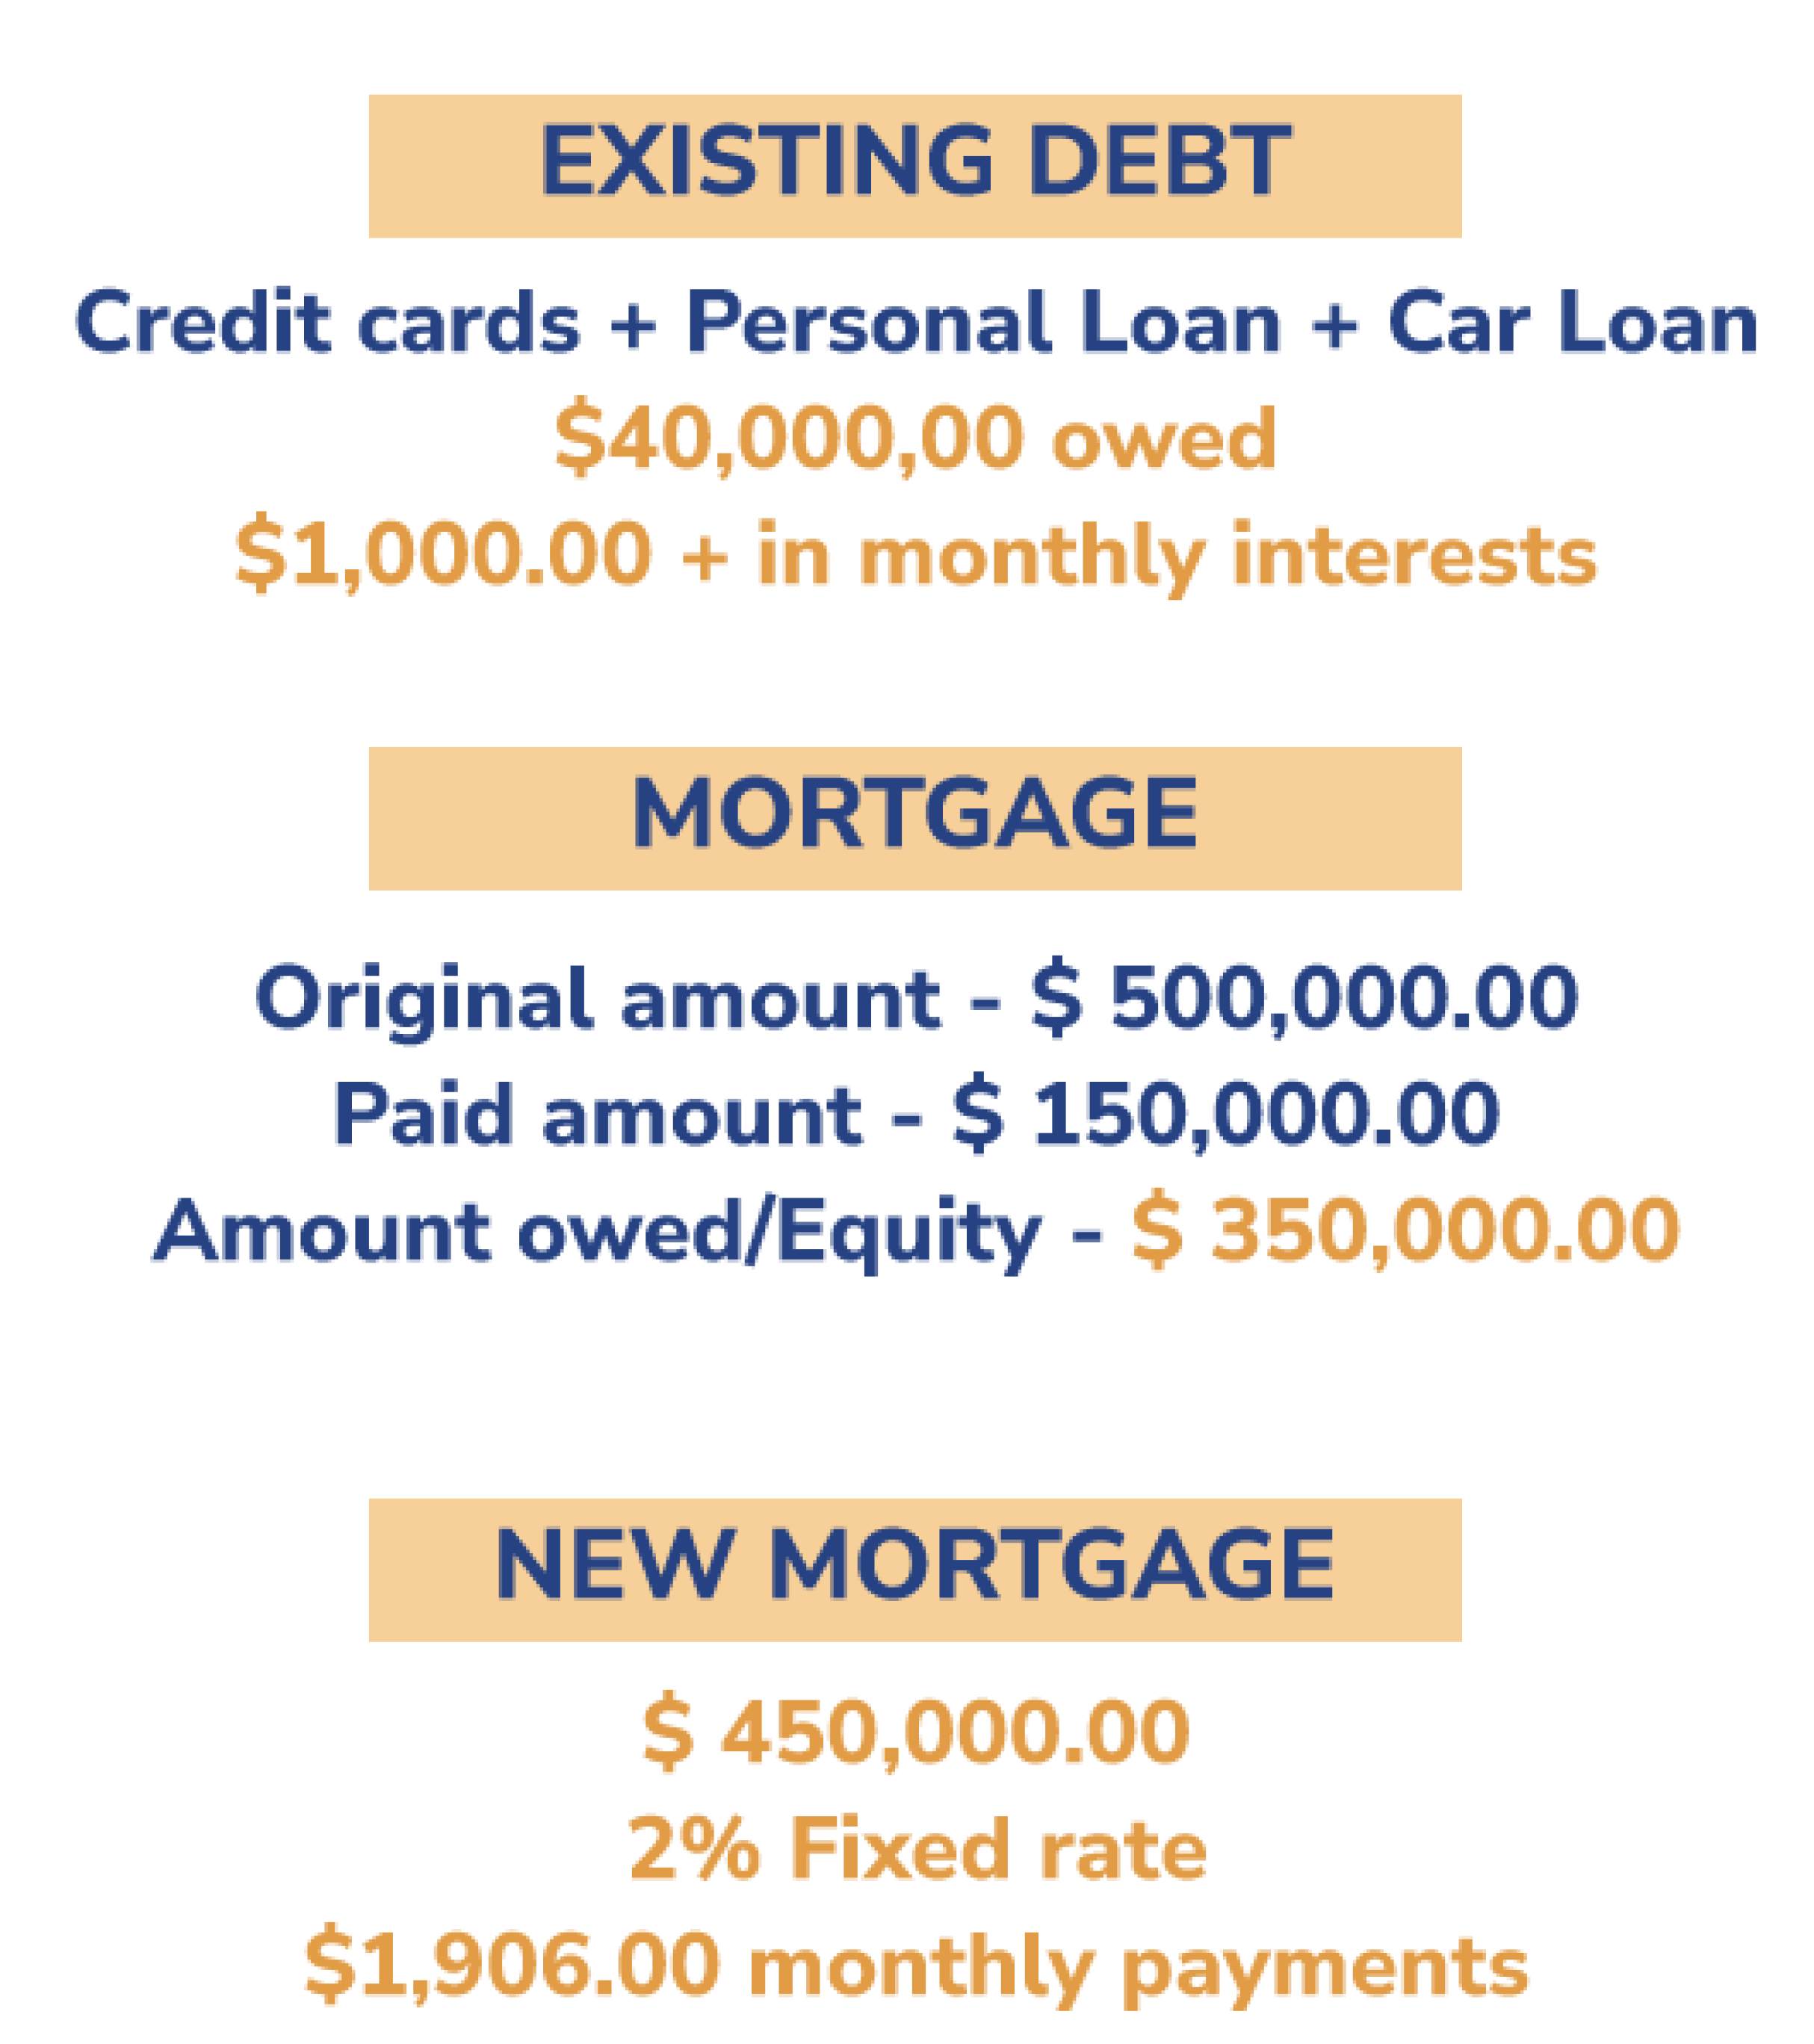 mortgages-debt-consolidation-image-right